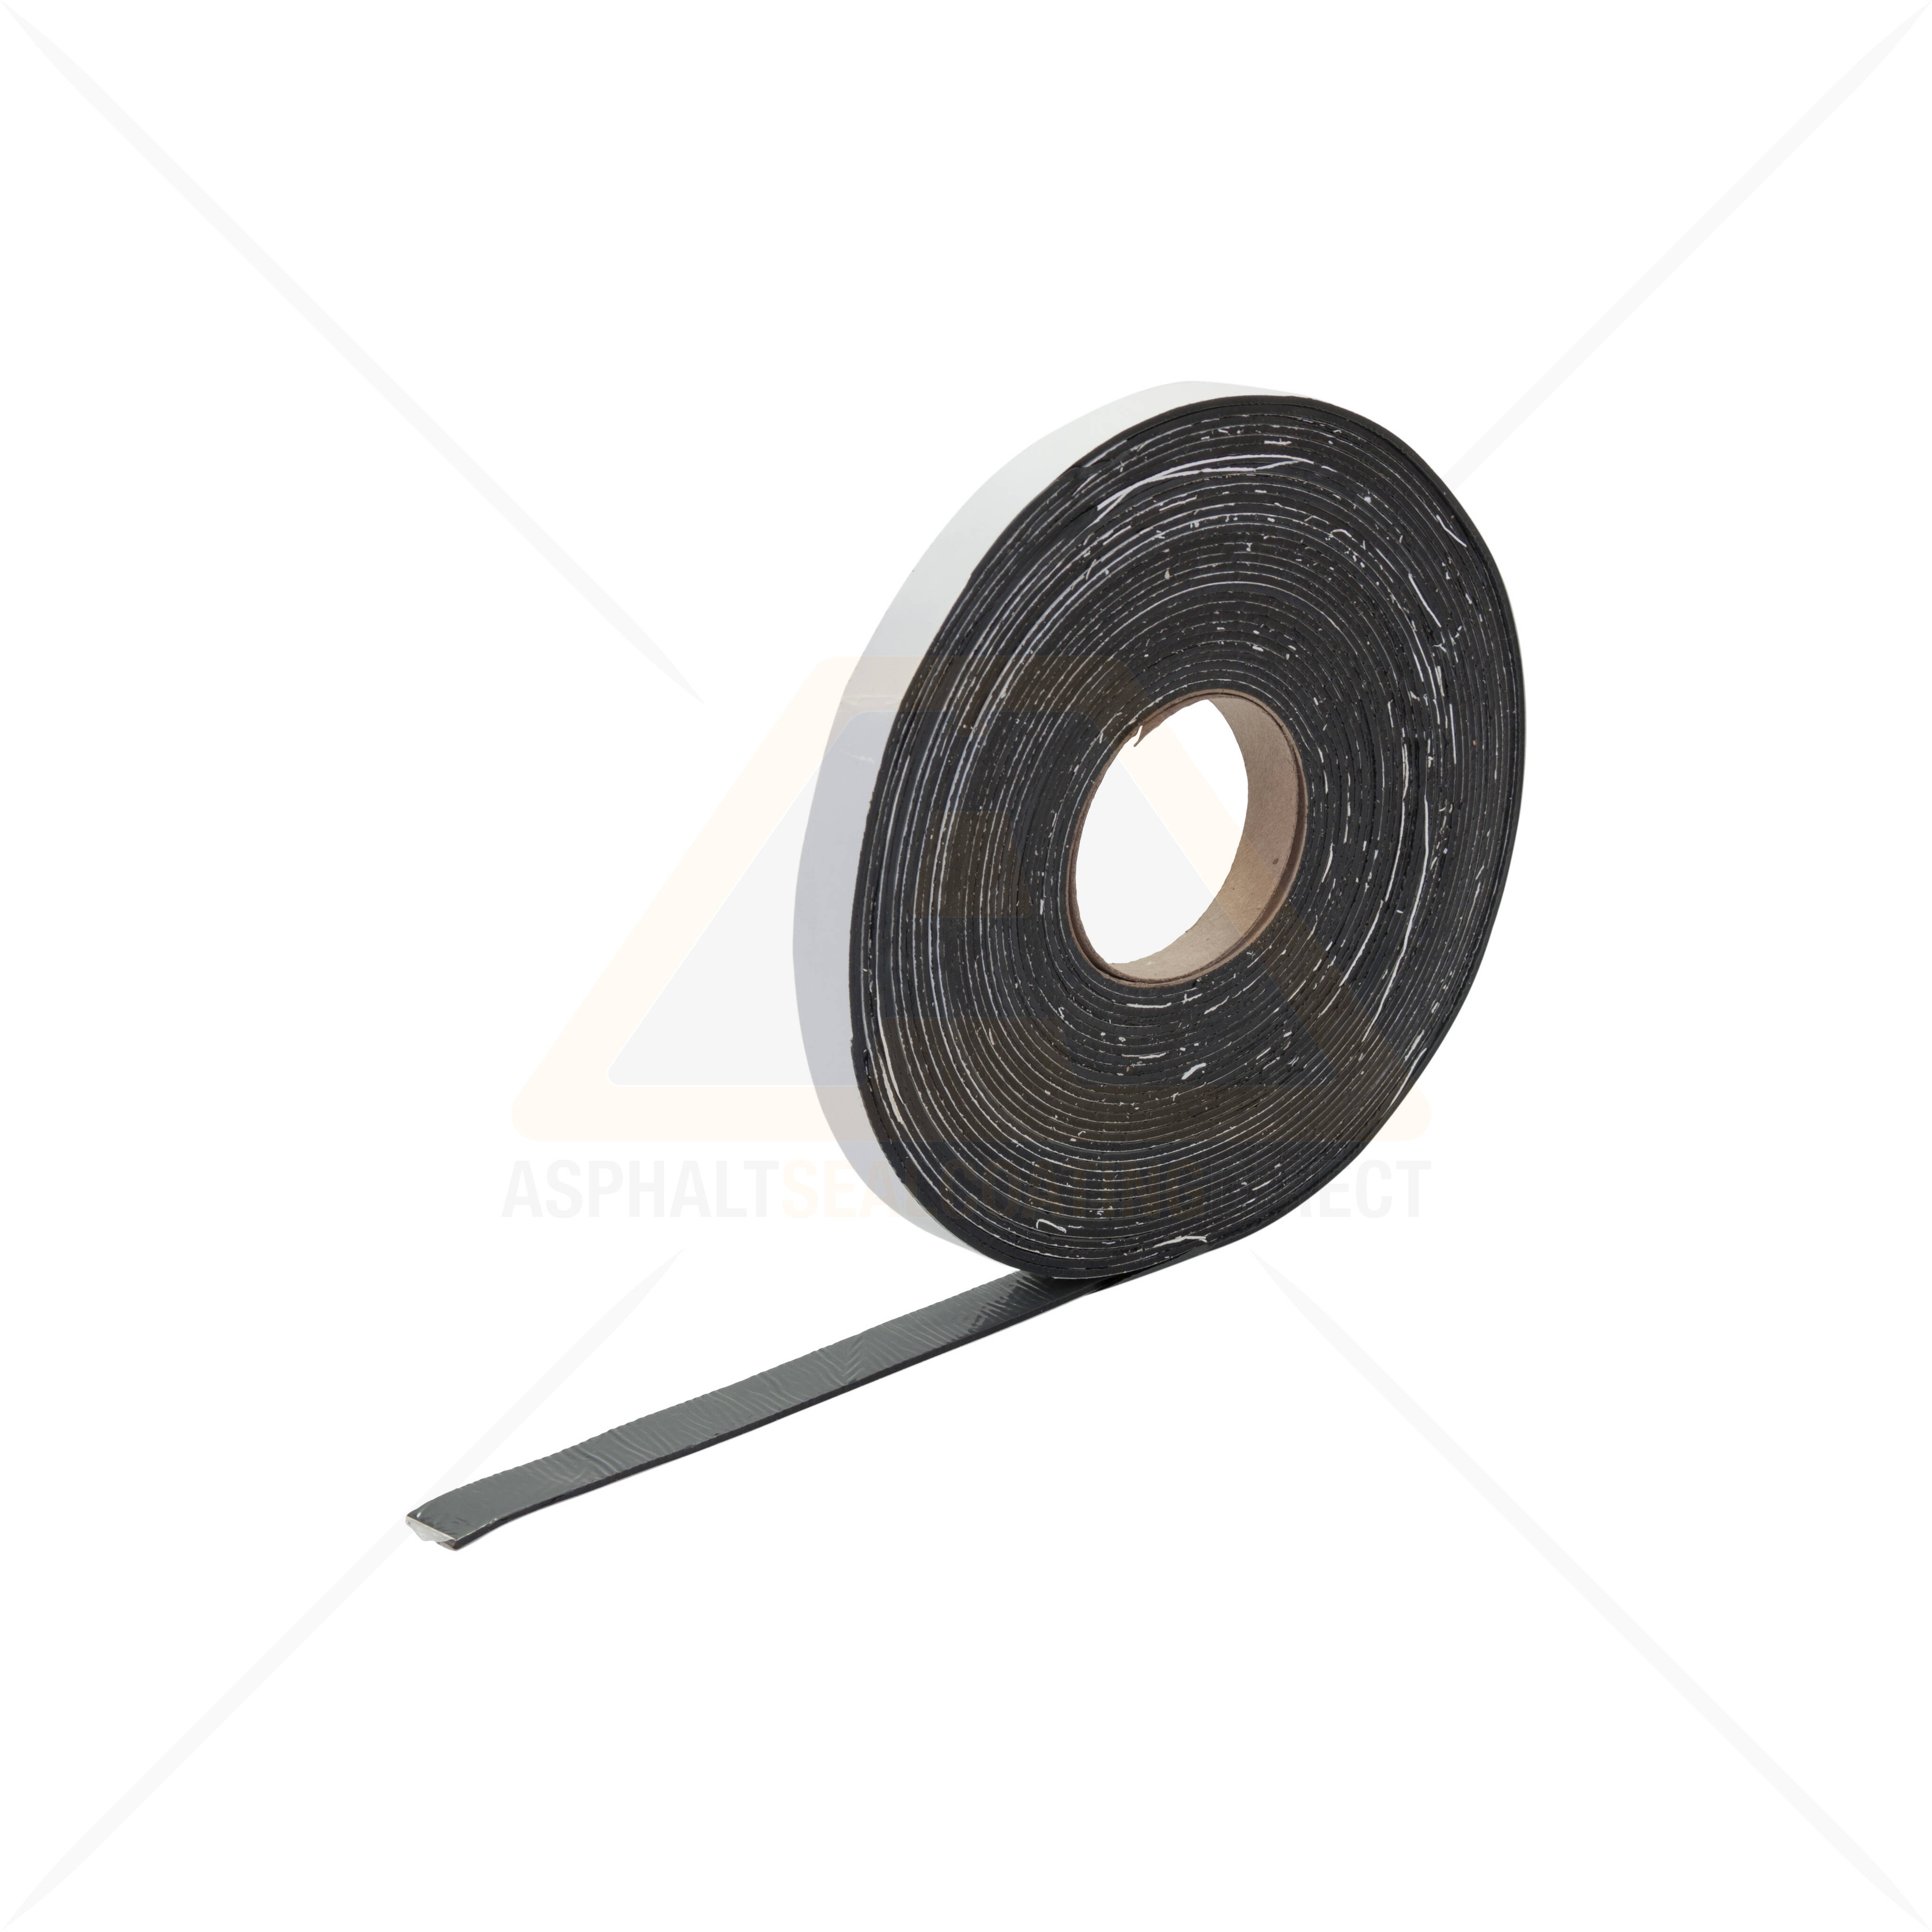 Double Sided Seaming Tape 2in x 50ft